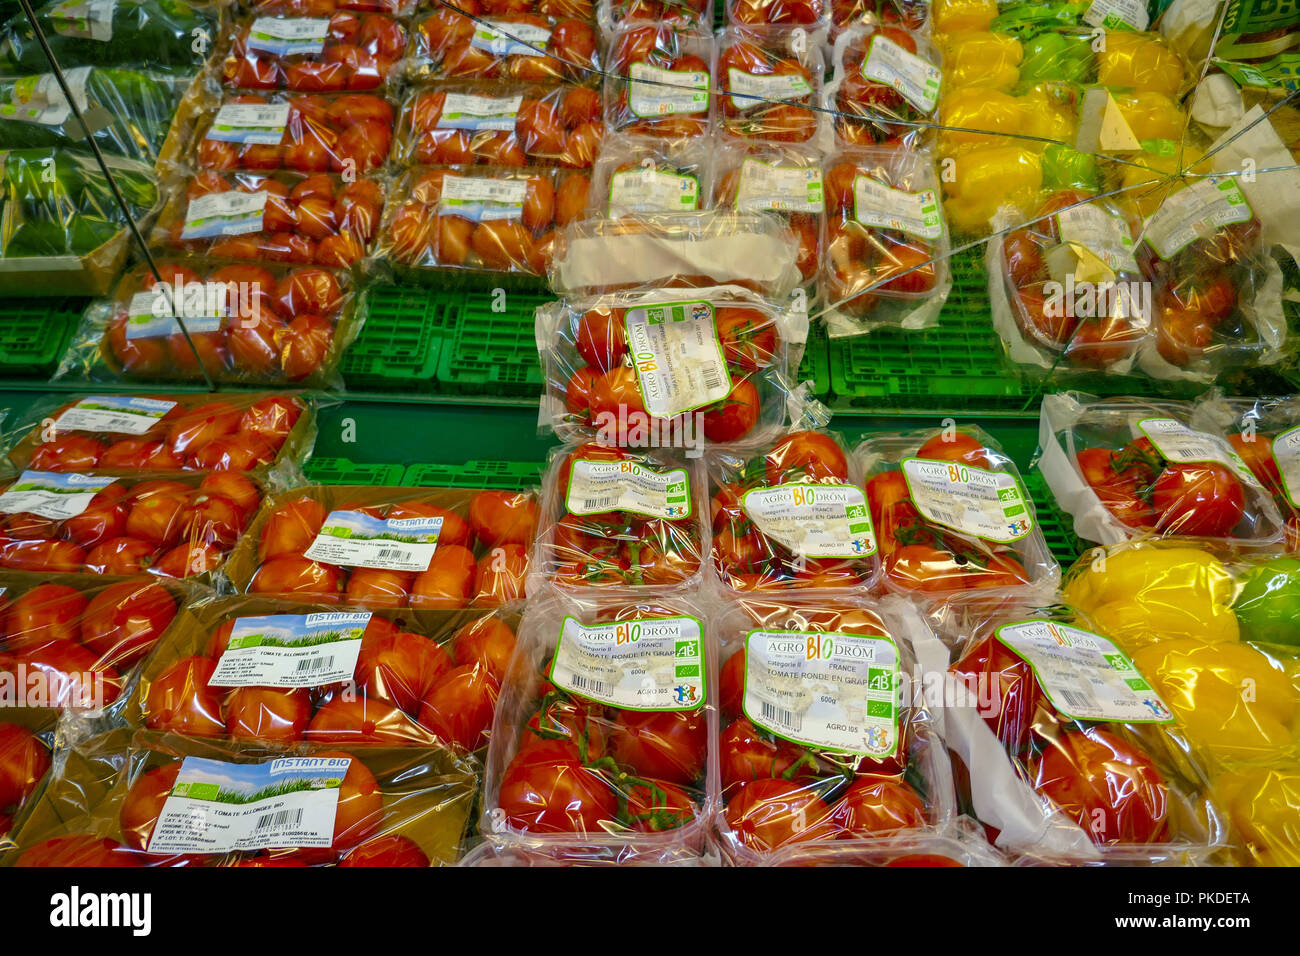 Tomatoes and pears, Fruit packed in plastic in a French supermarket Stock Photo